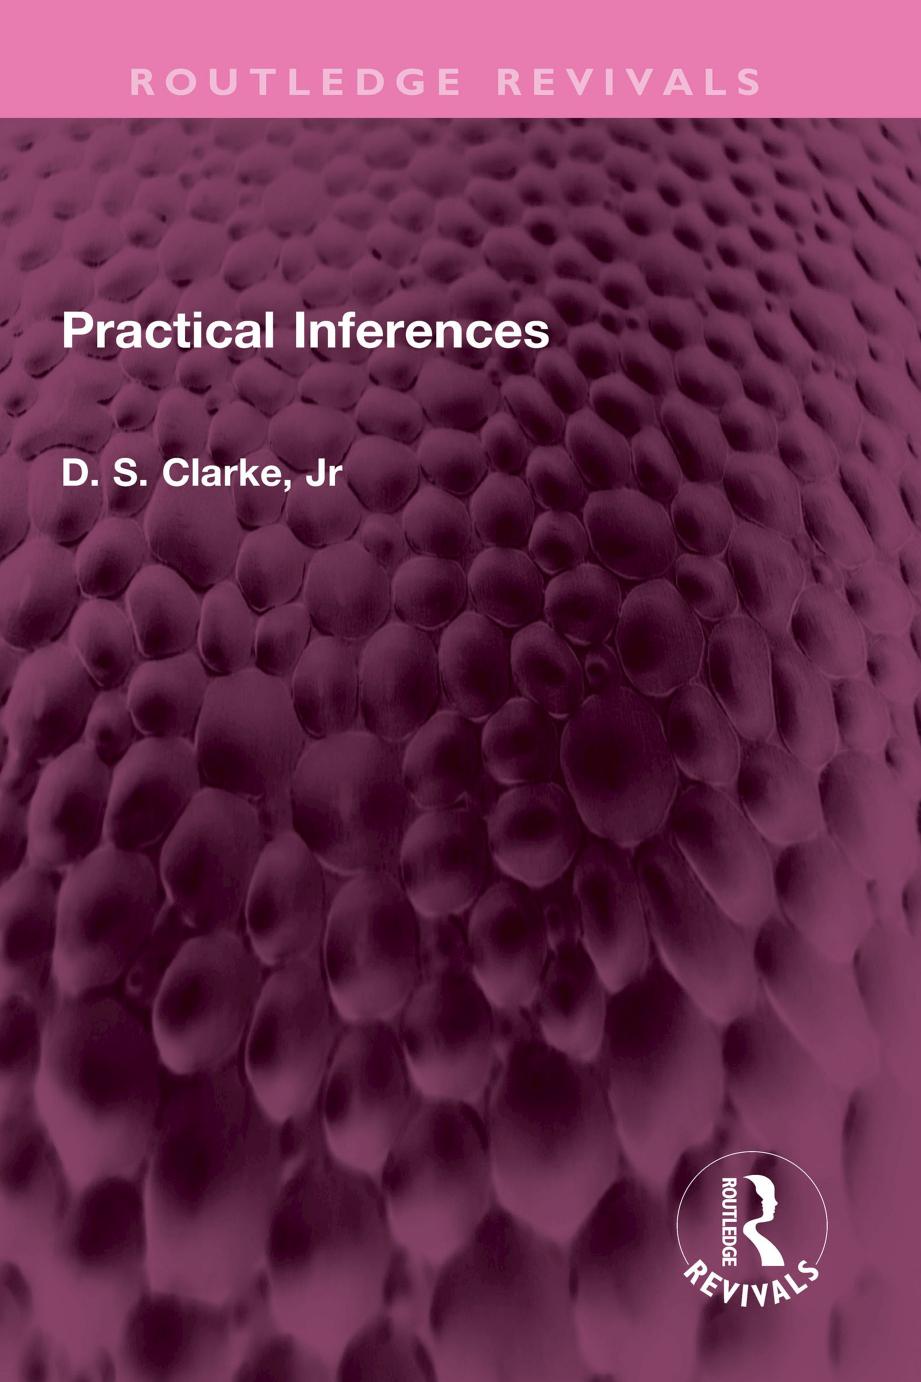 Practical Inferences by D. S. Clarke Jr